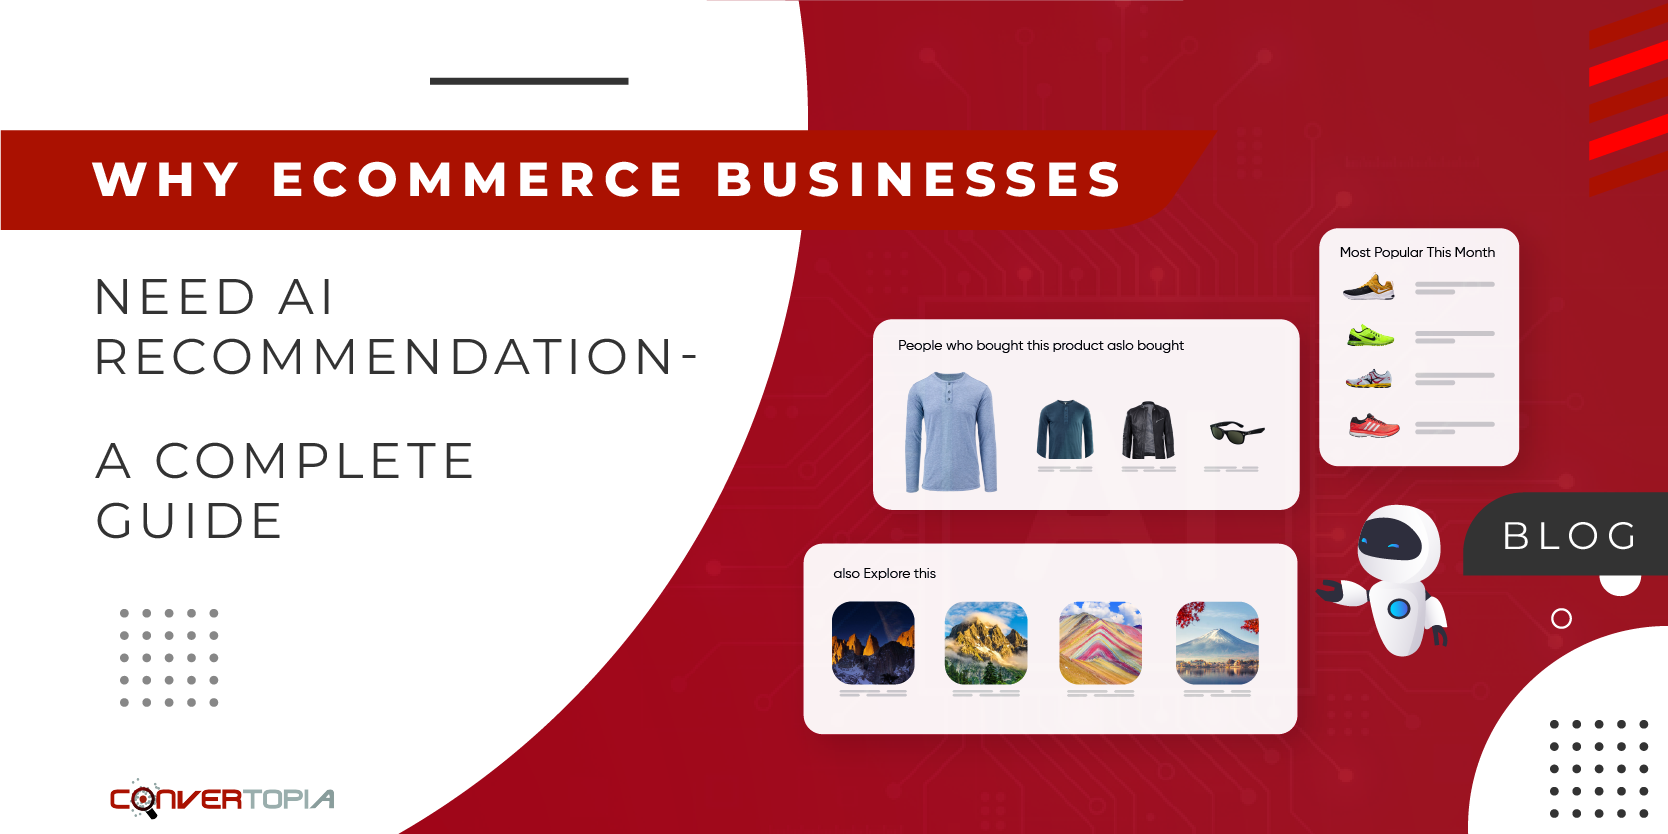 ● Why ecommerce businesses need AI recommendation- A Complete Guide